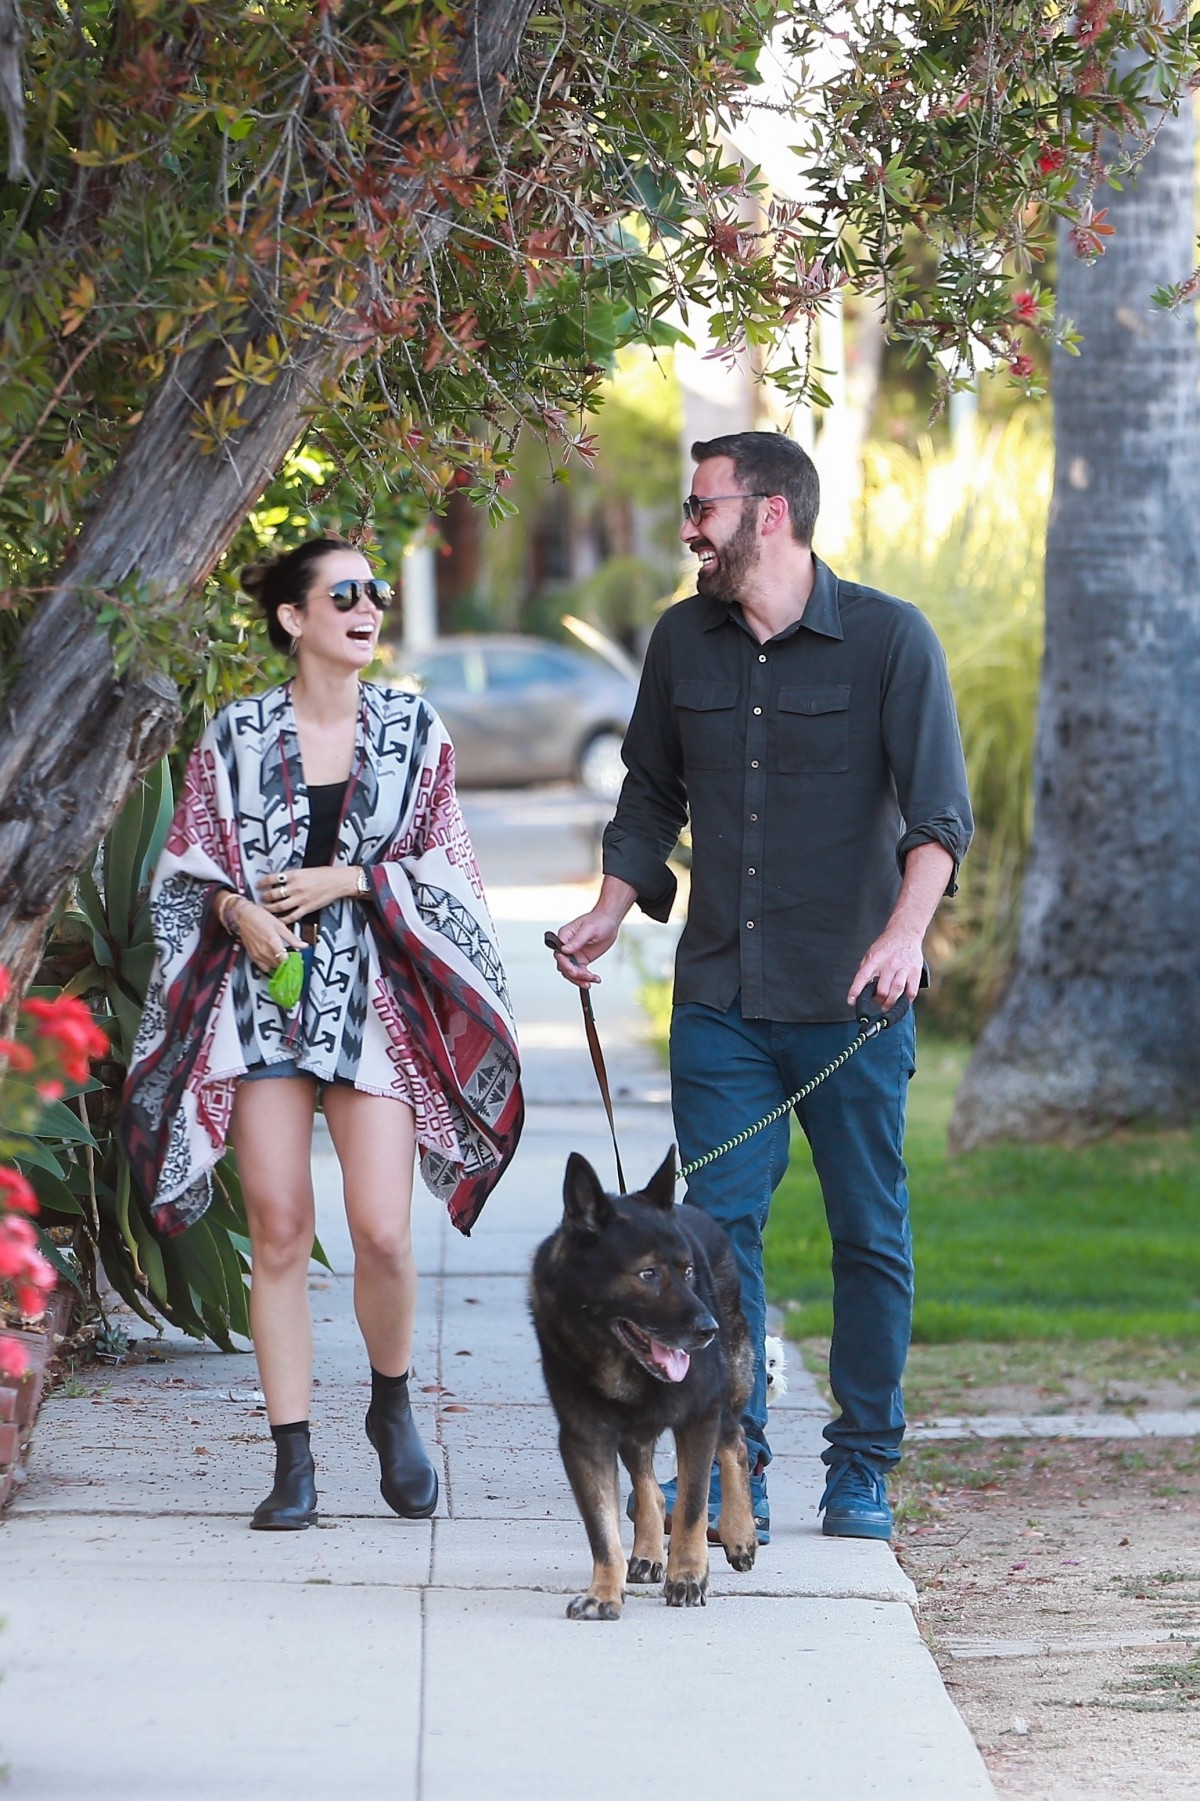 Ben Affleck and Ana de Armas take their dogs out for an evening stroll